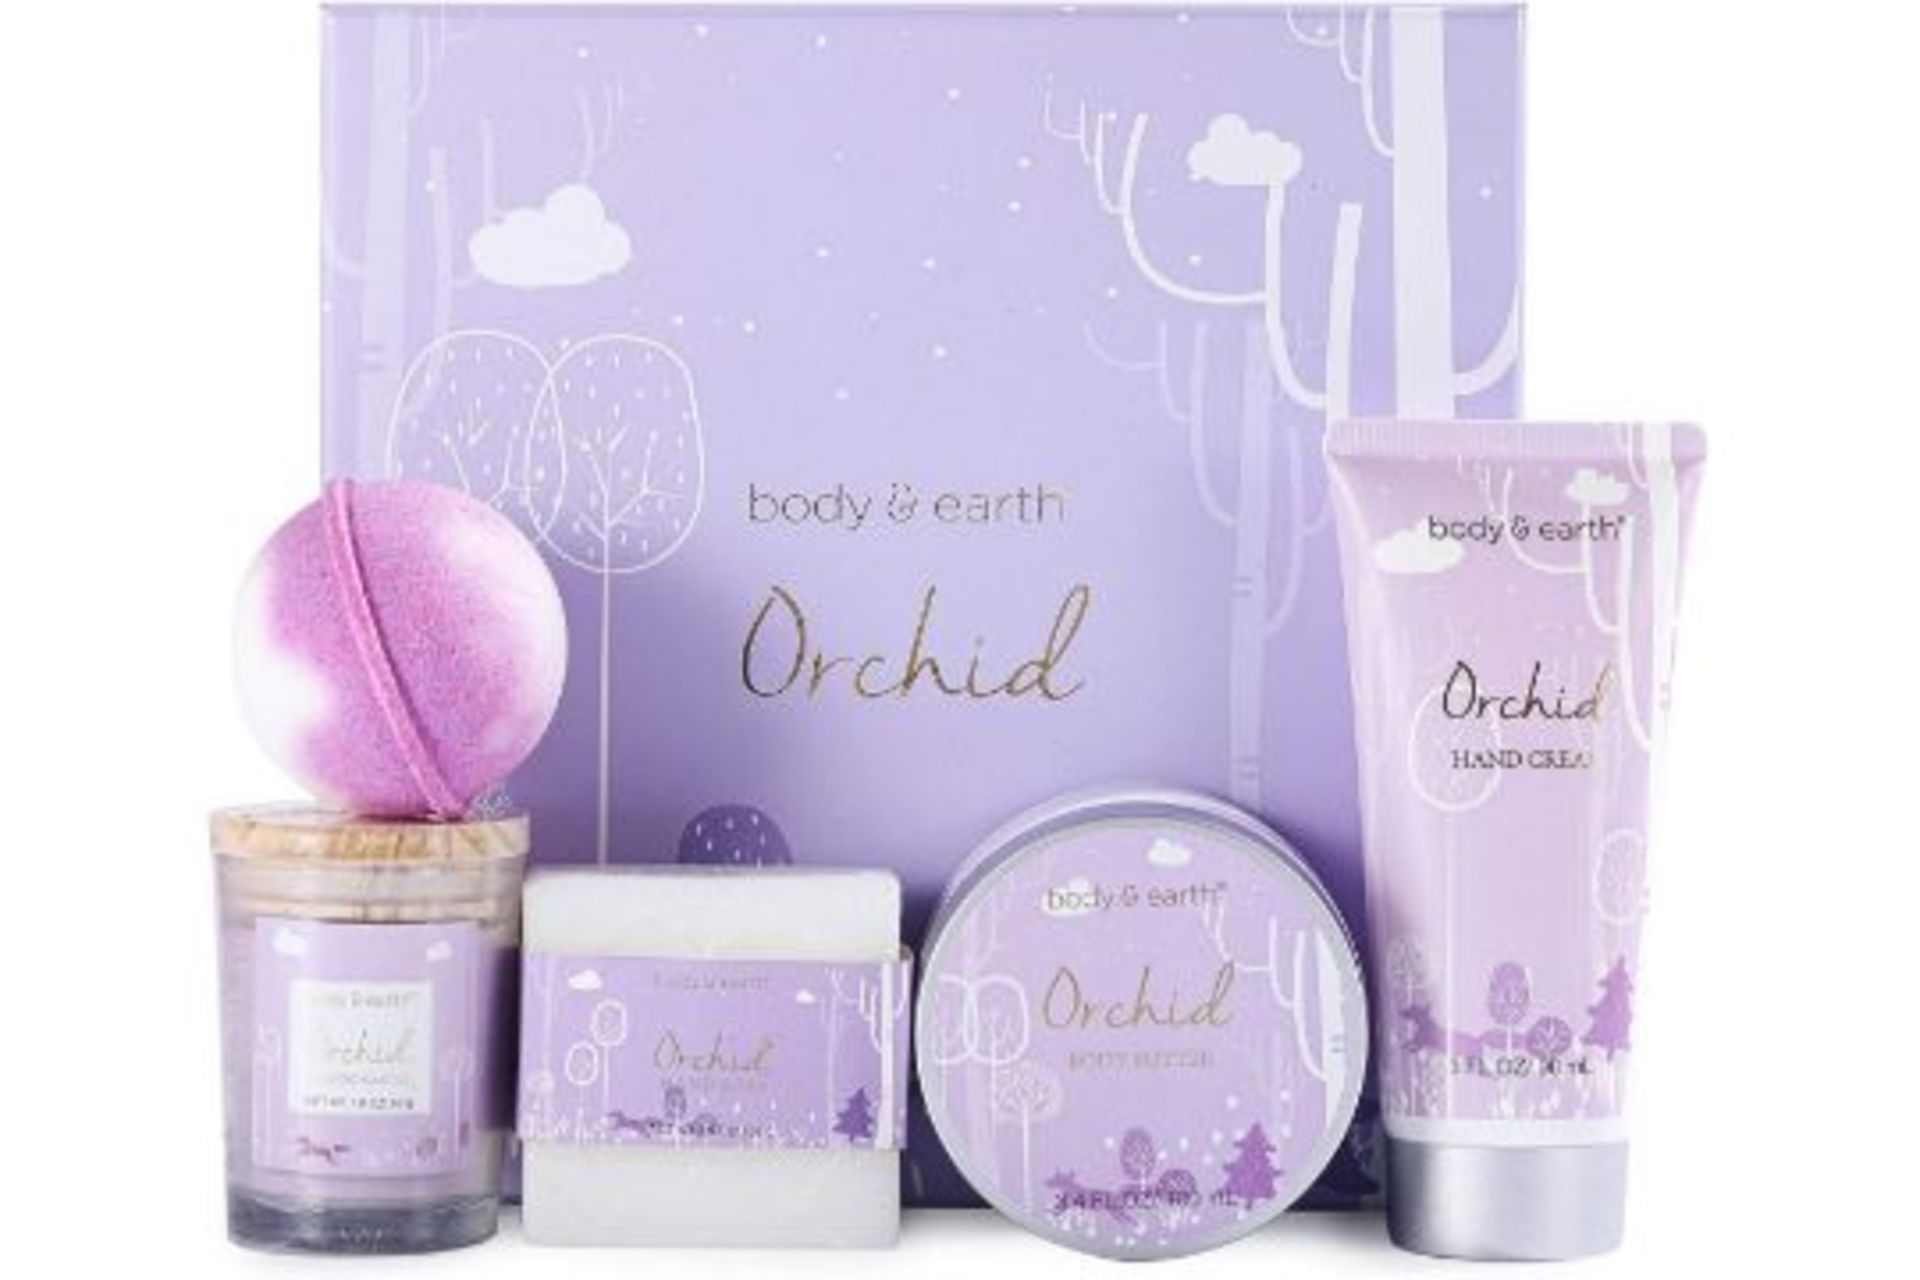 16 X New Packaged Body & Earth Orchid Bath Gift Set. (BE-BP-043) Orchid Scent: Infused with a